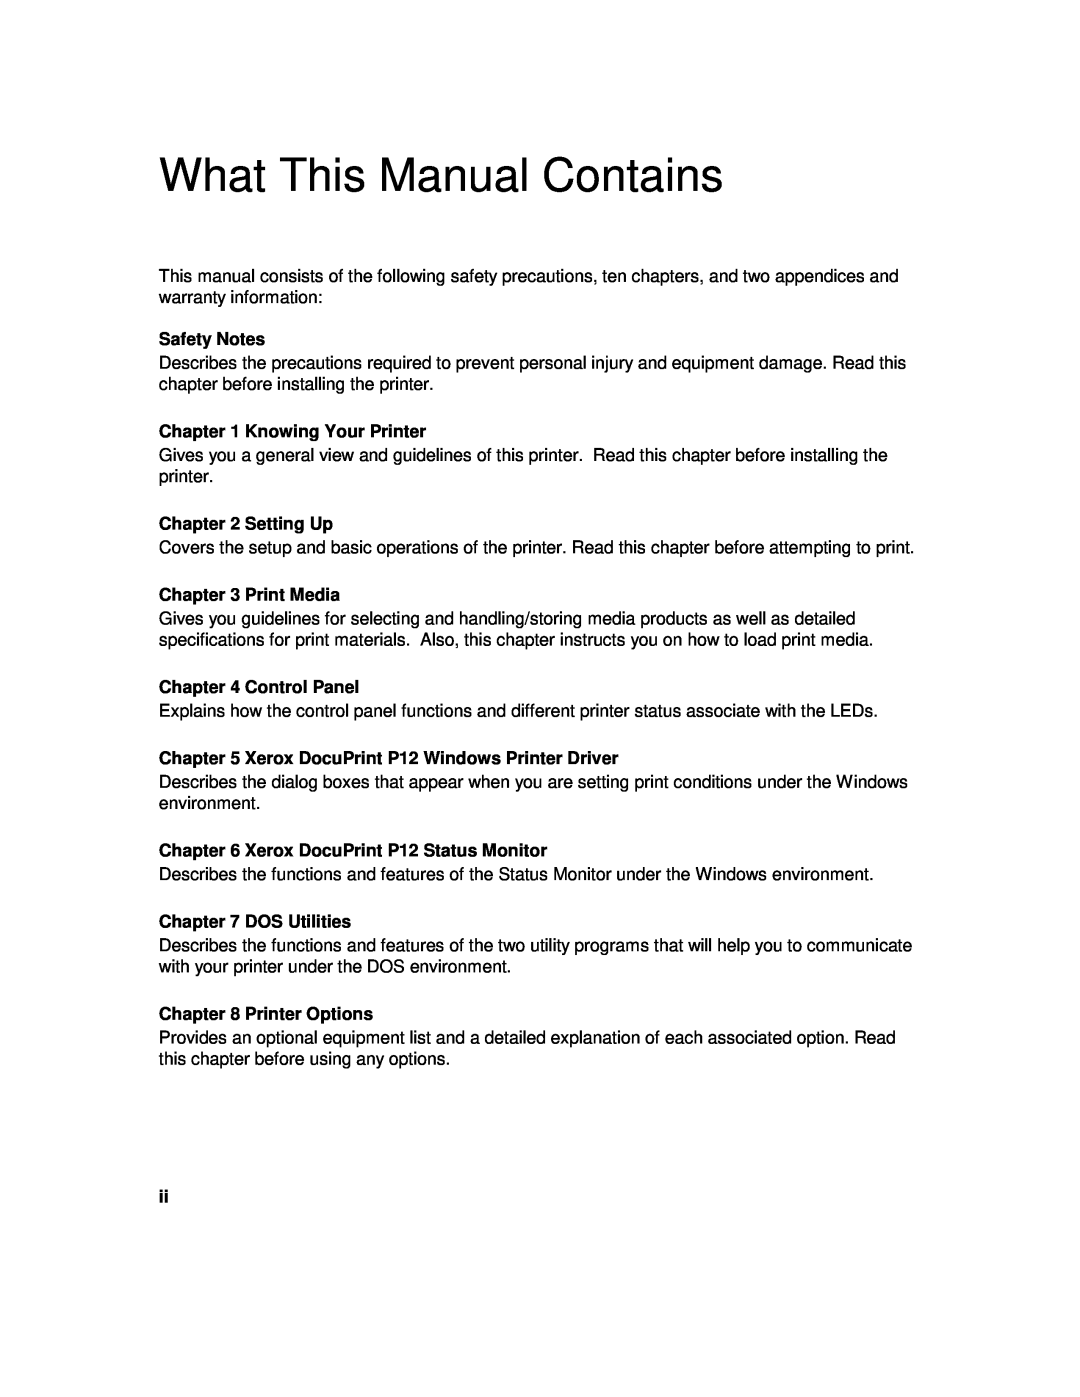 Xerox P12 manual What This Manual Contains, Safety Notes, Knowing Your Printer, Setting Up, Print Media, Control Panel 